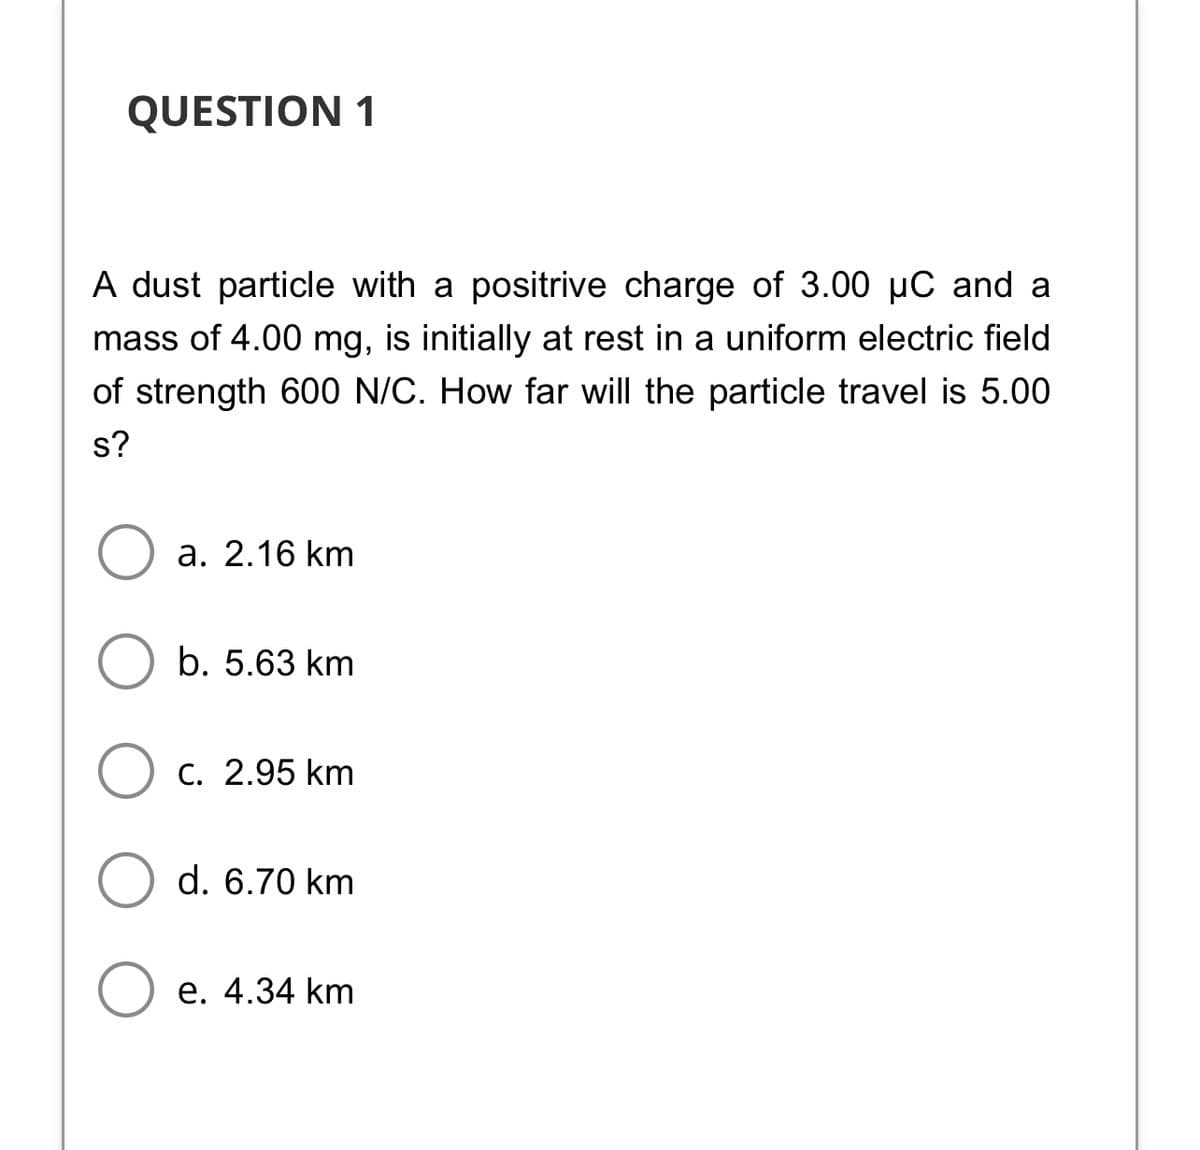 QUESTION 1
A dust particle with a positrive charge of 3.00 µC and a
mass of 4.00 mg, is initially at rest in a uniform electric field
of strength 600 N/C. How far will the particle travel is 5.00
s?
а. 2.16 km
b. 5.63 km
Ос. 2.95 km
d. 6.70 km
е. 4.34 km
